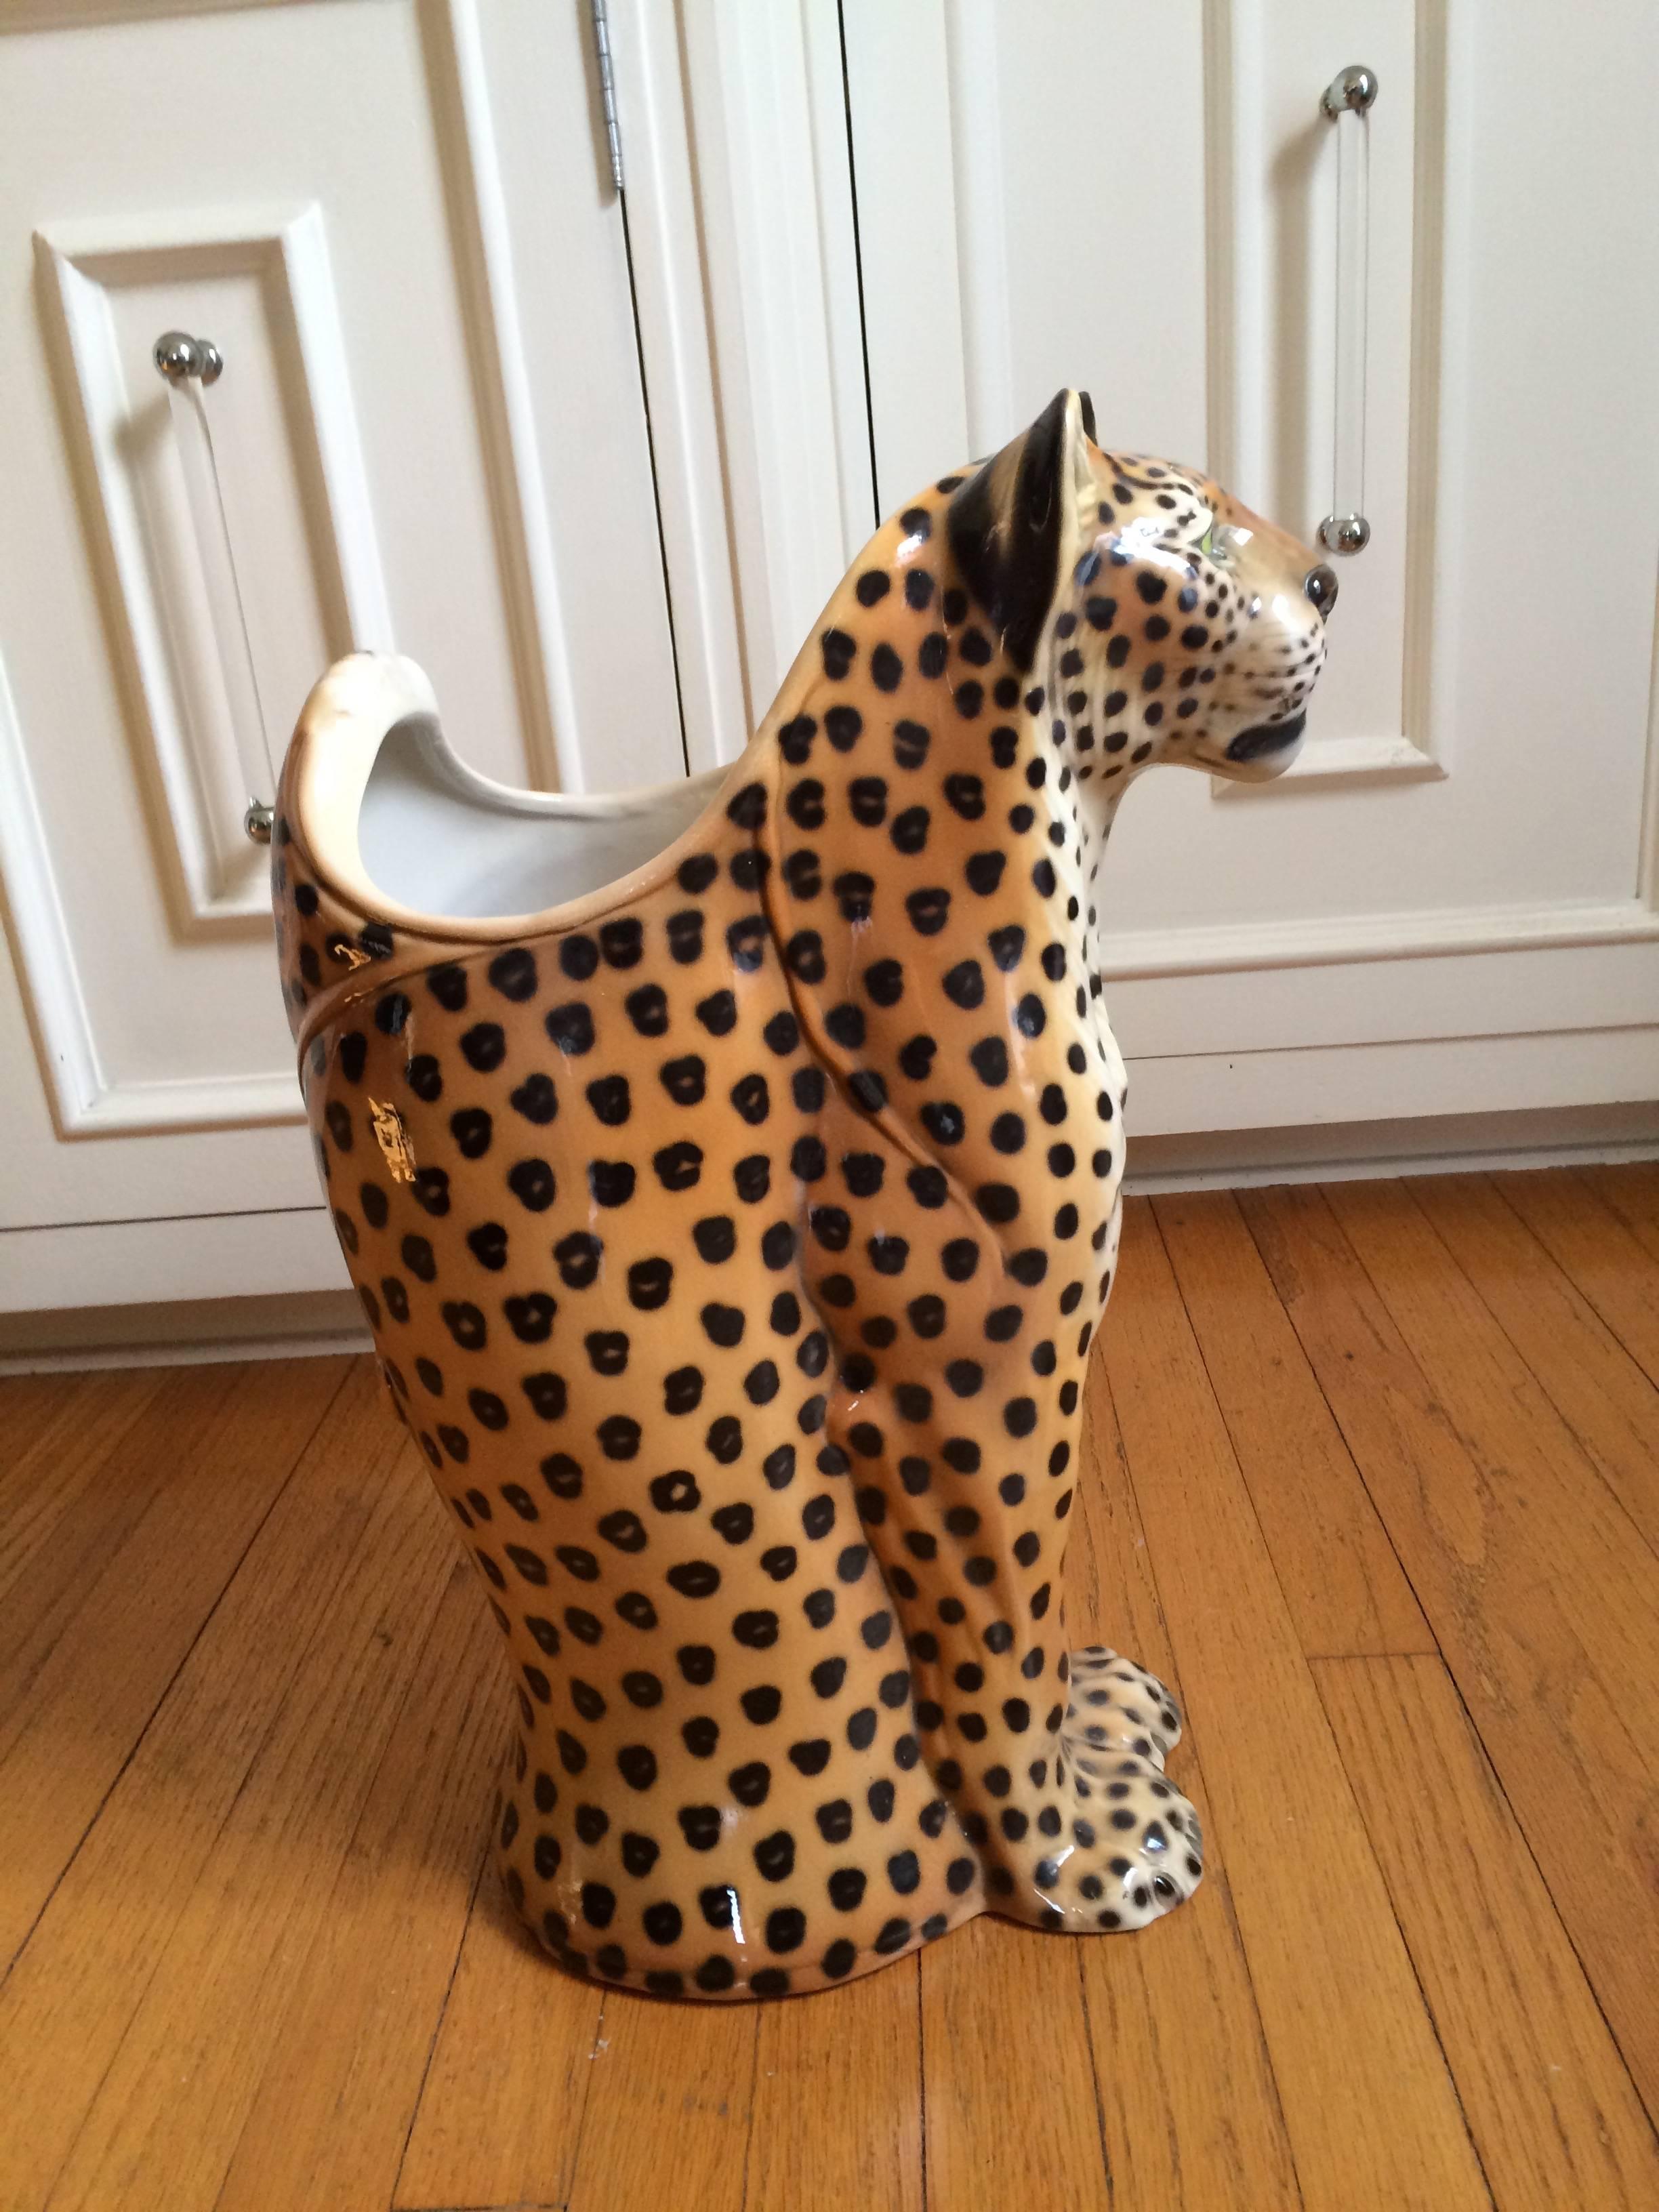 Add a bit of whimsy to any doorway or loggia with this Leopard! A cool cat that minds your Umbrella's and those of your guests!